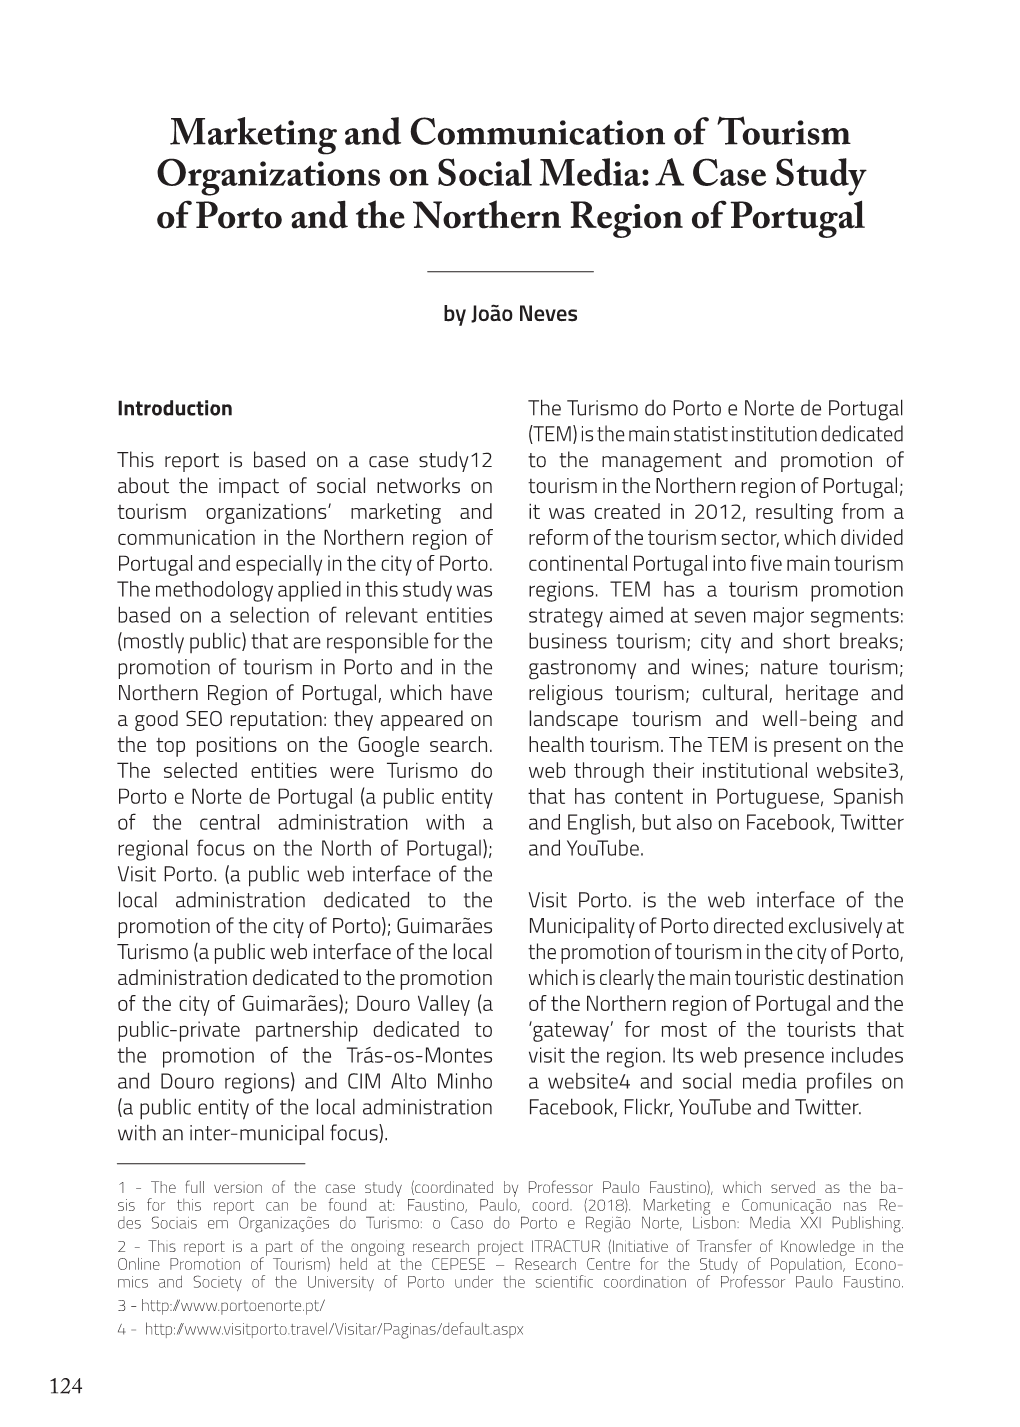 A Case Study of Porto and the Northern Region of Portugal